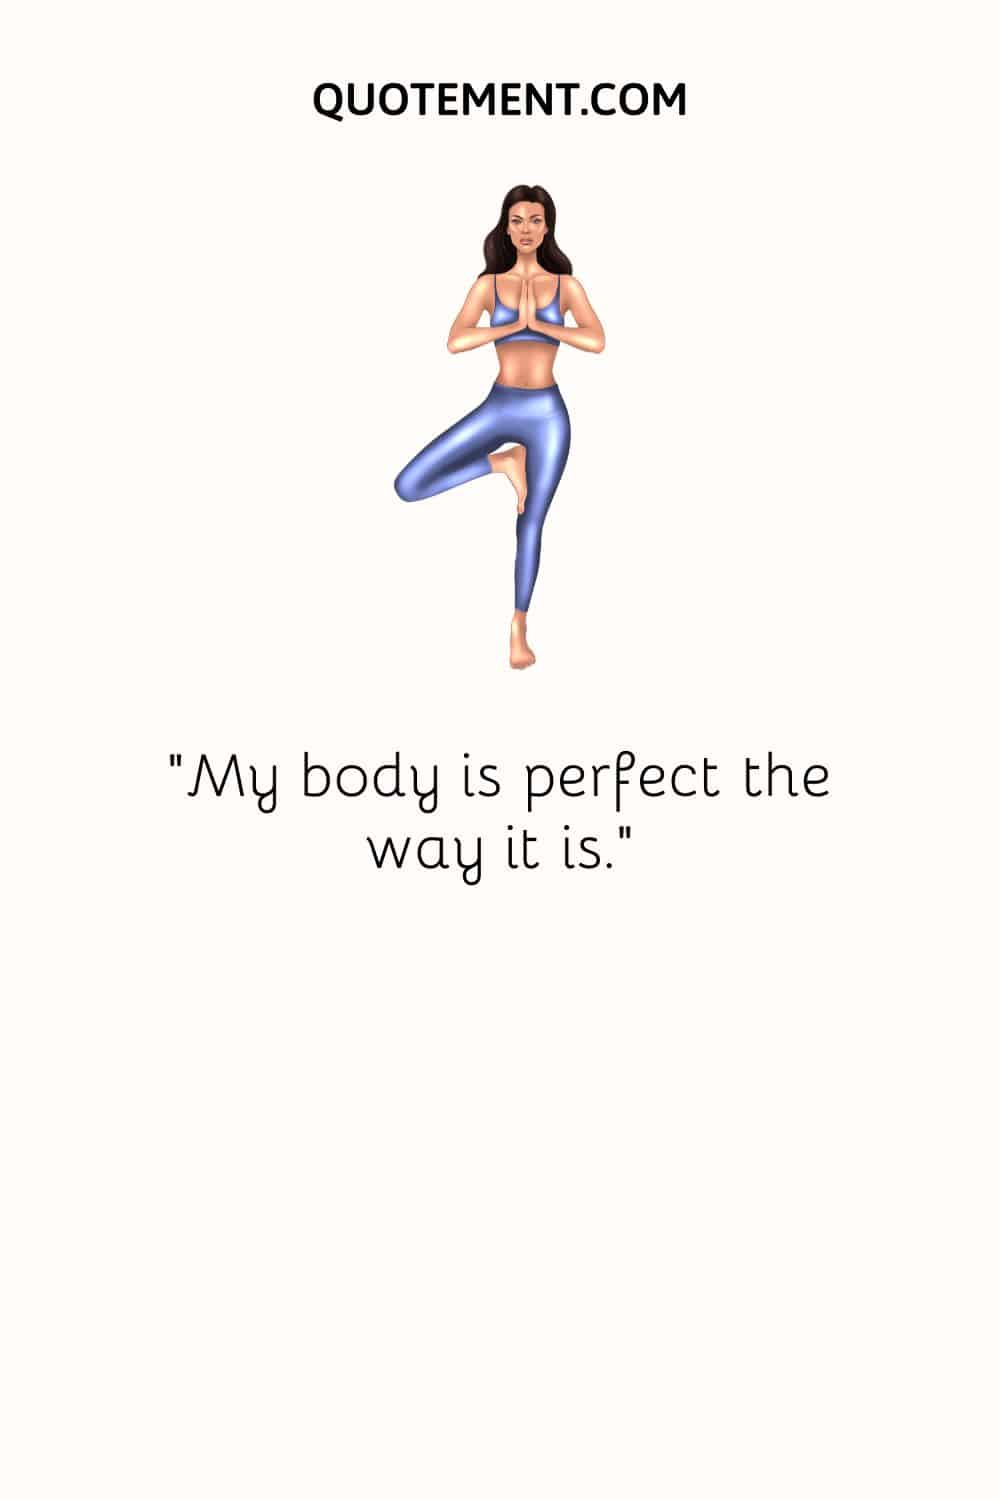 image of a girl doing yoga representing positive affirmation on health